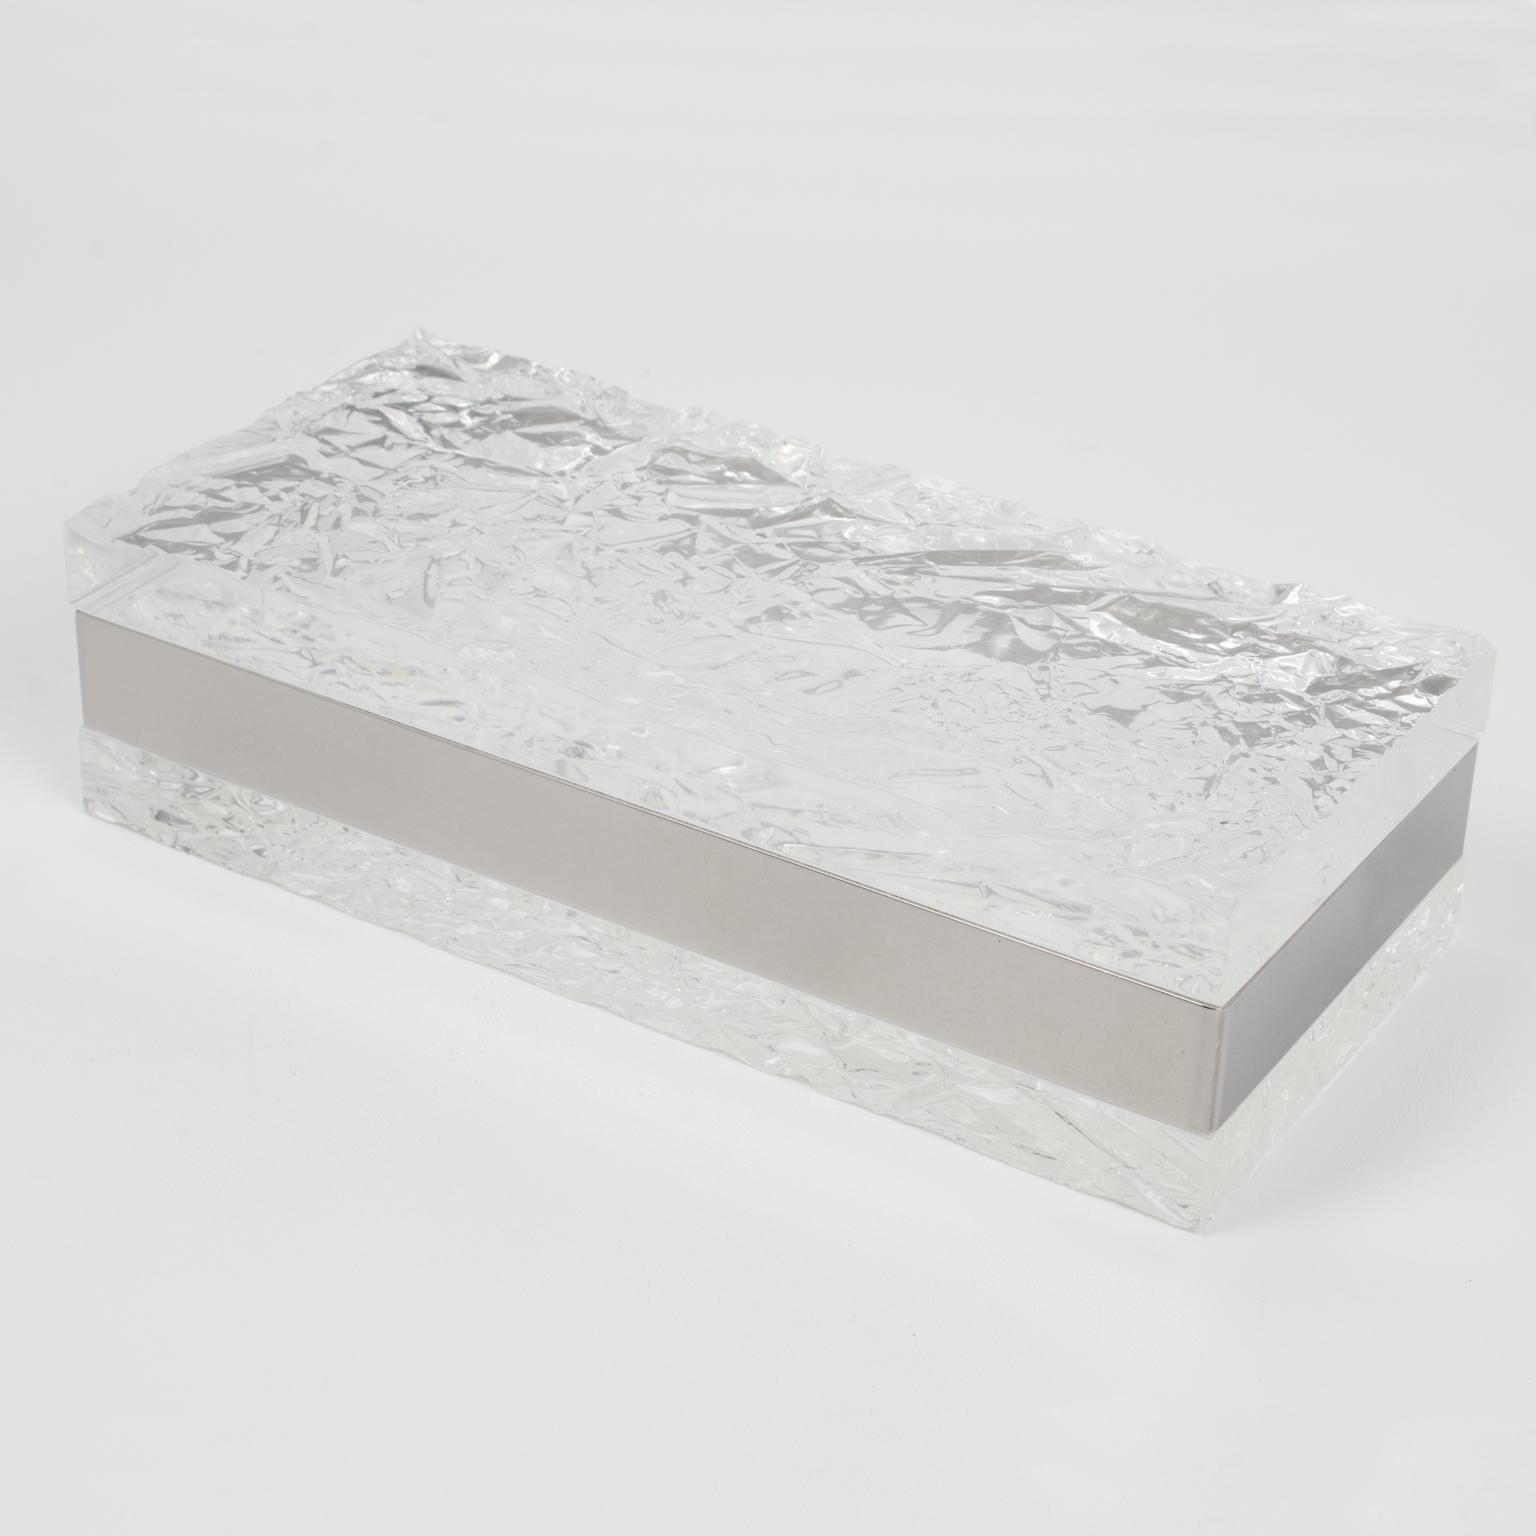 Late 20th Century Willy Rizzo Style Ice Effect Lucite and Chrome Decorative Box, 1970s For Sale